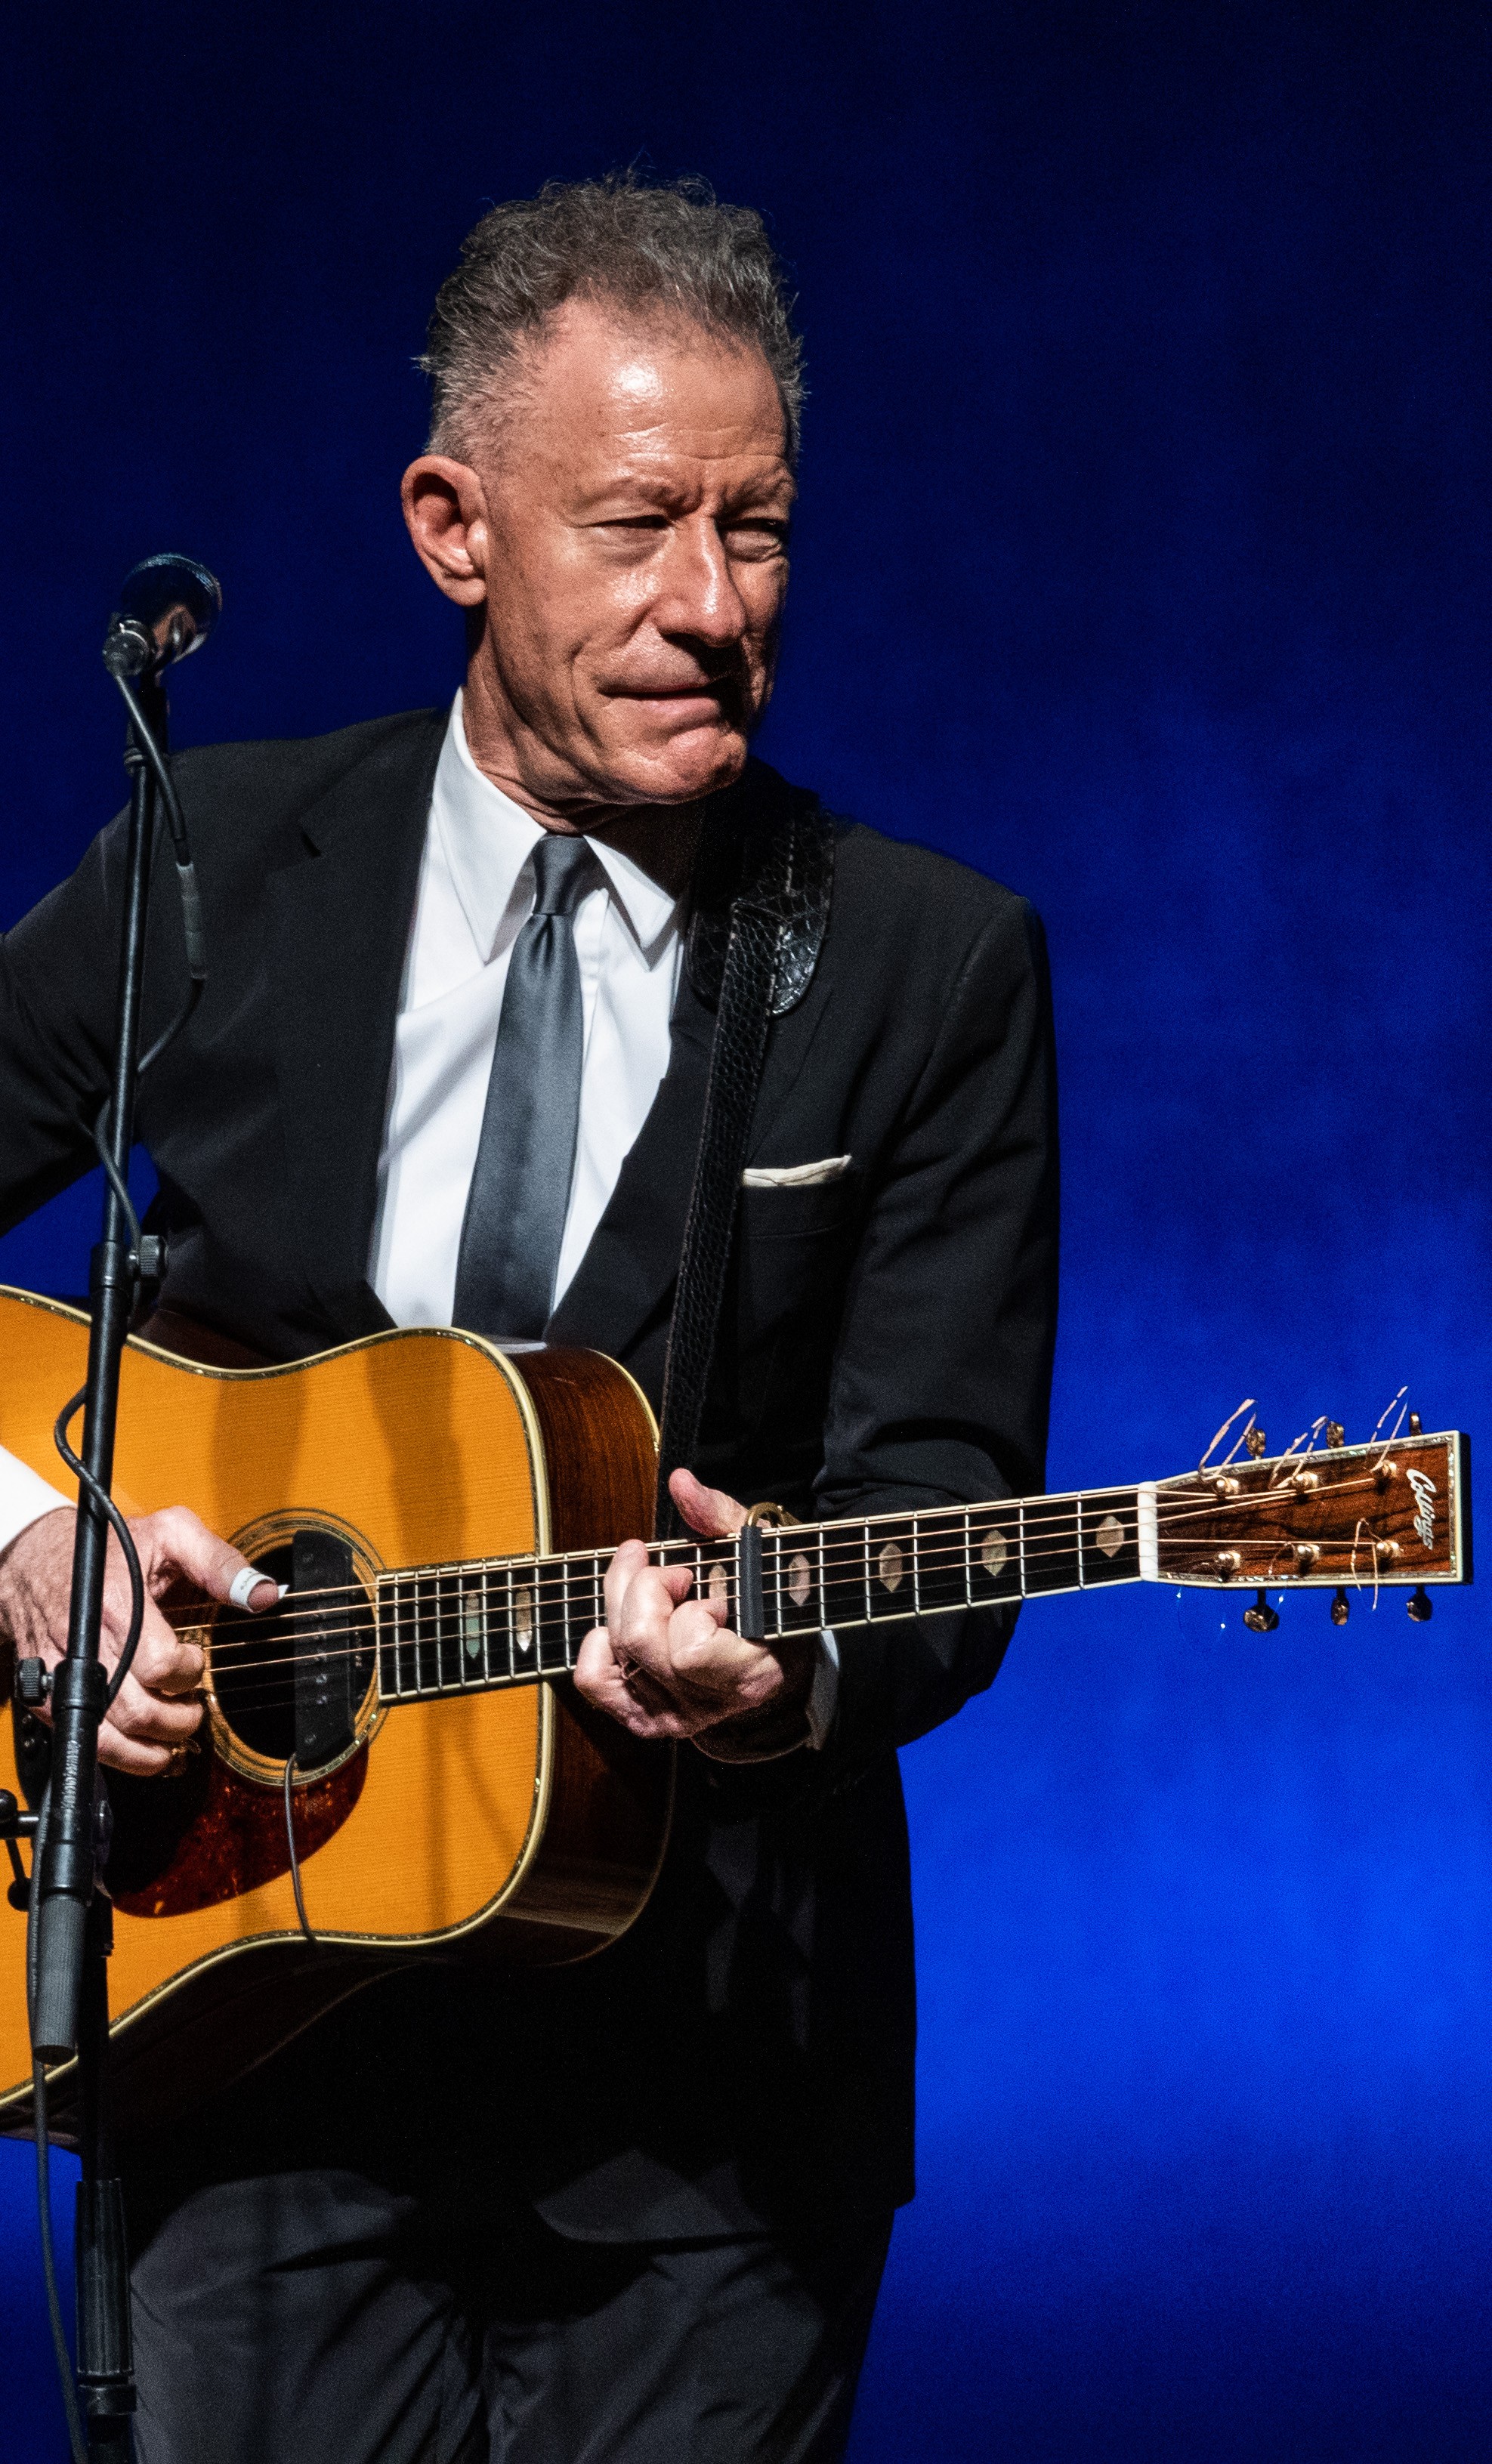 Lyle Lovett Played a Masterful First Concert in a String of 3 Dallas